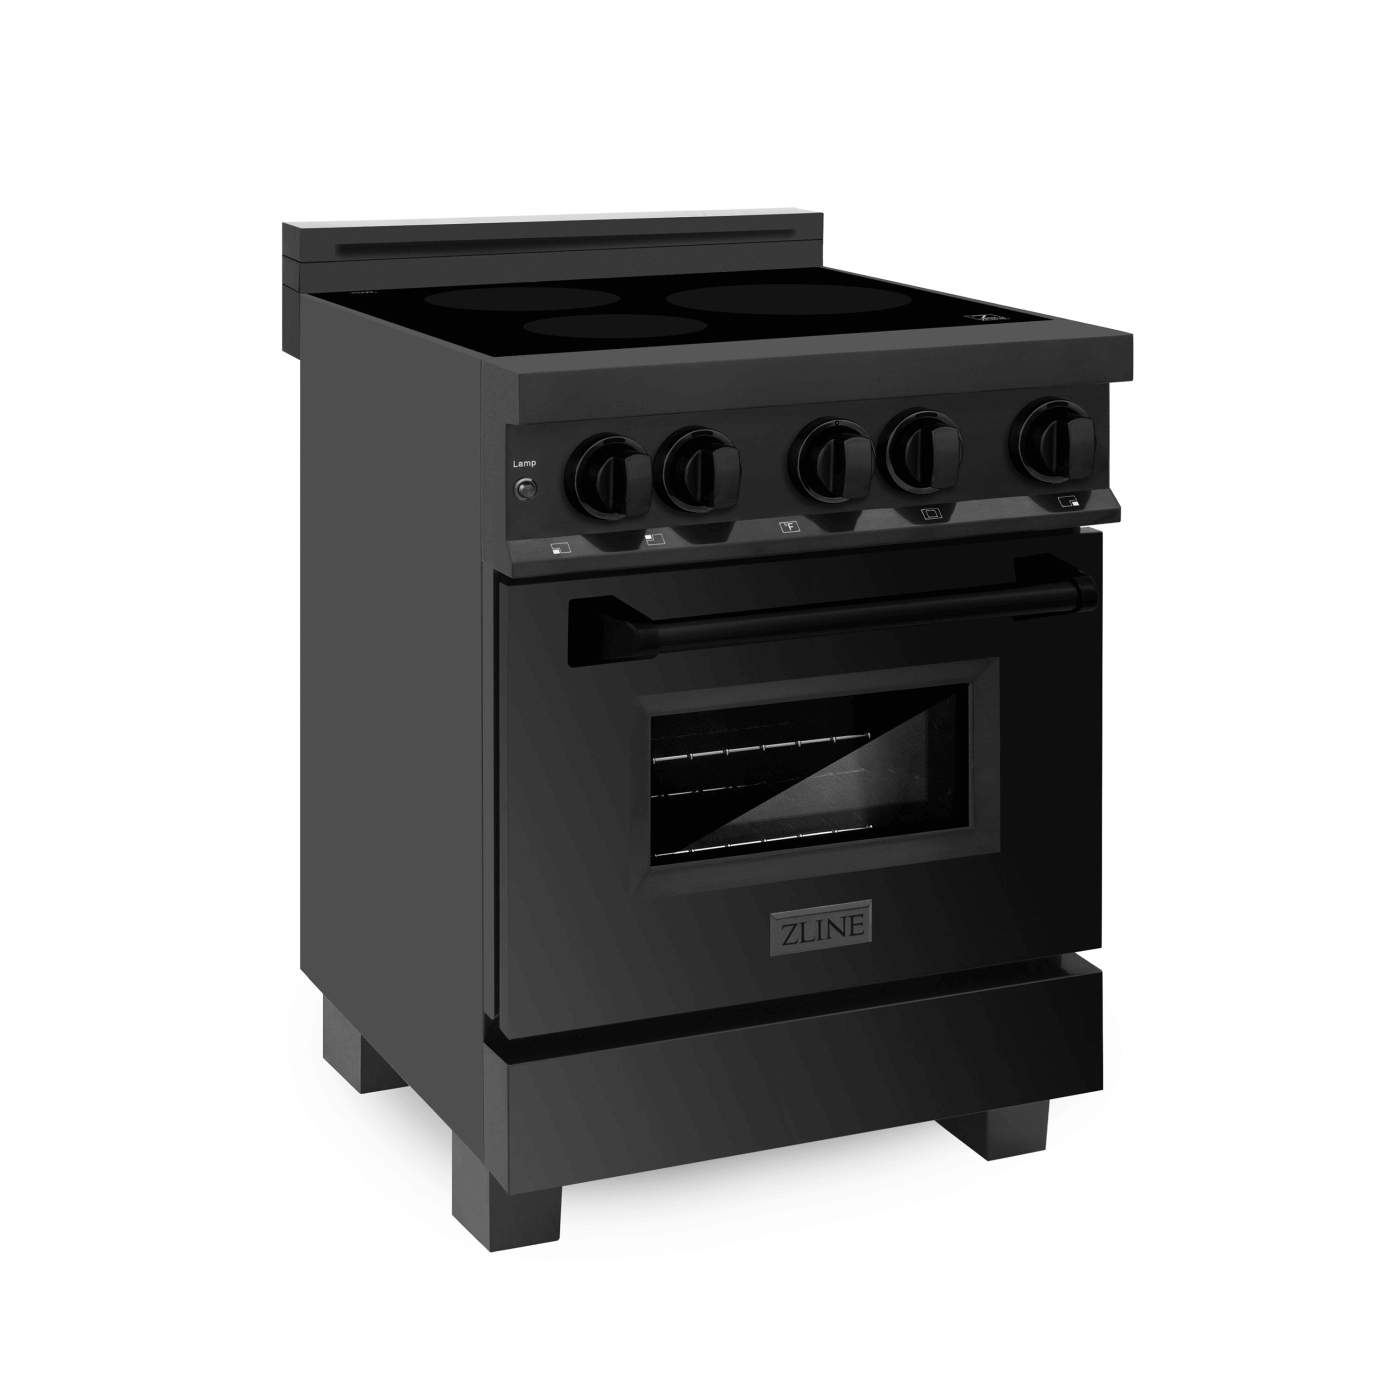 ZLINE 24 in. 2.8 cu. ft. Induction Range with a 3 Element Stove and Electric Oven in Black Stainless Steel - white background